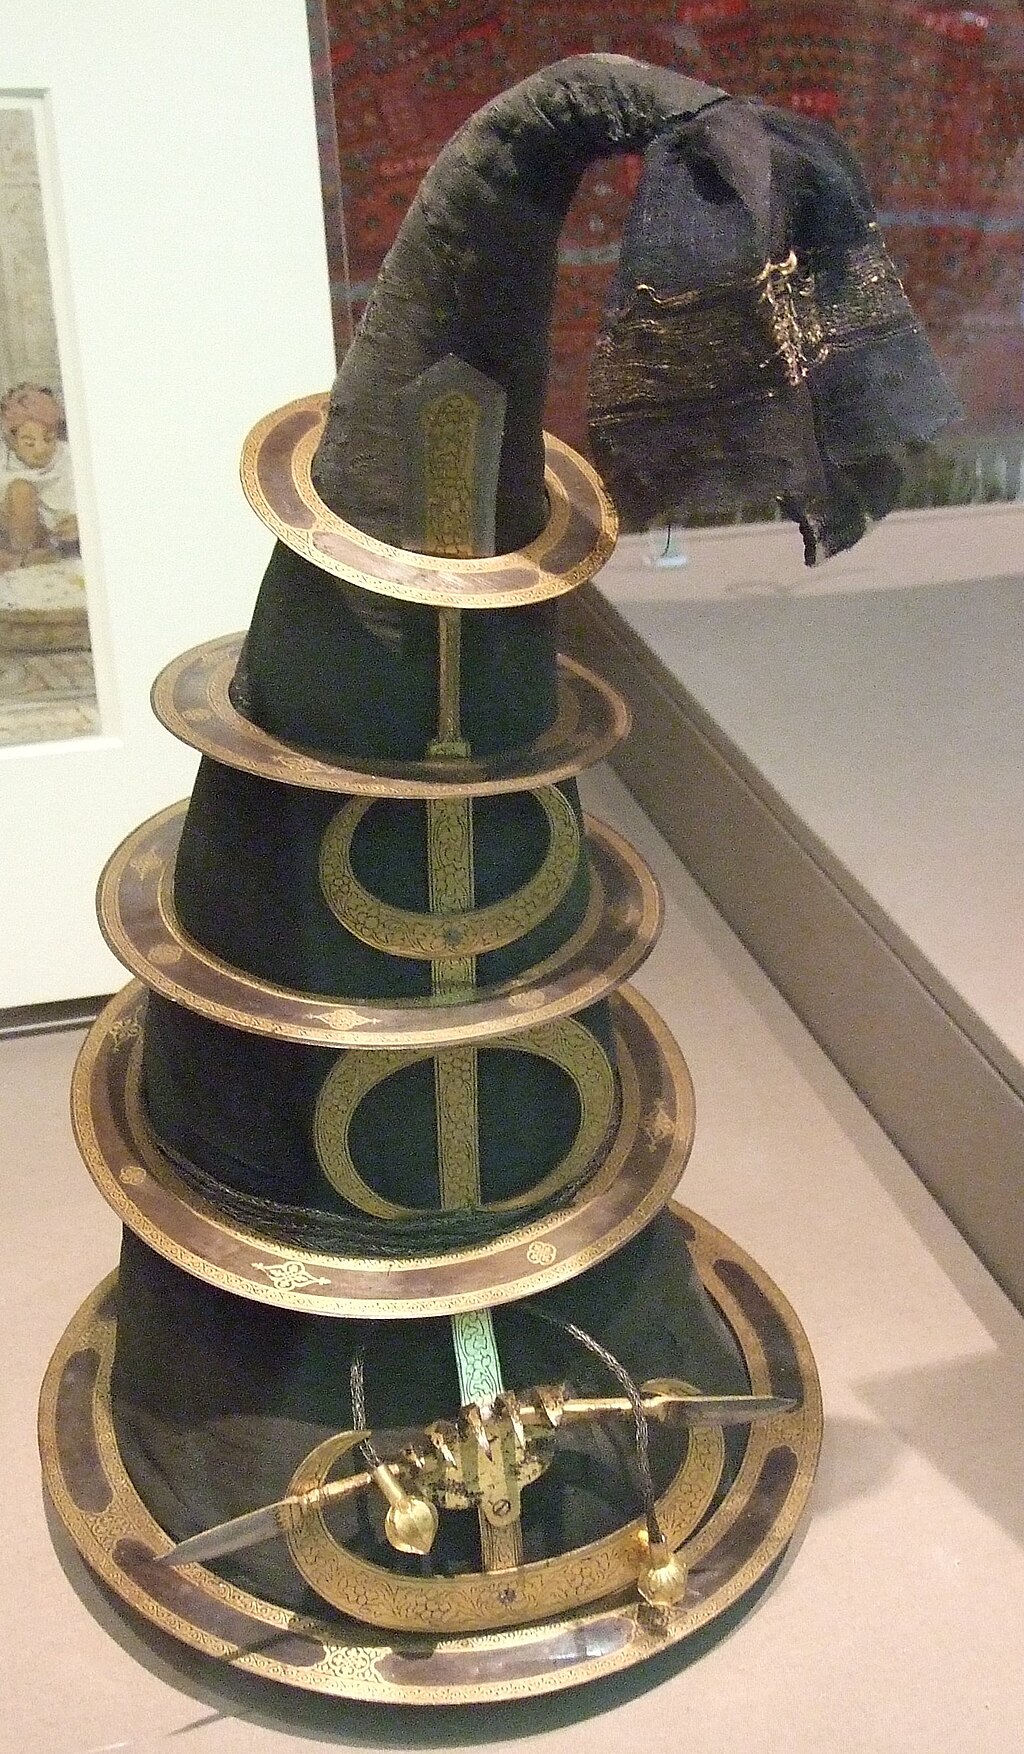 Akali Turban with quoits